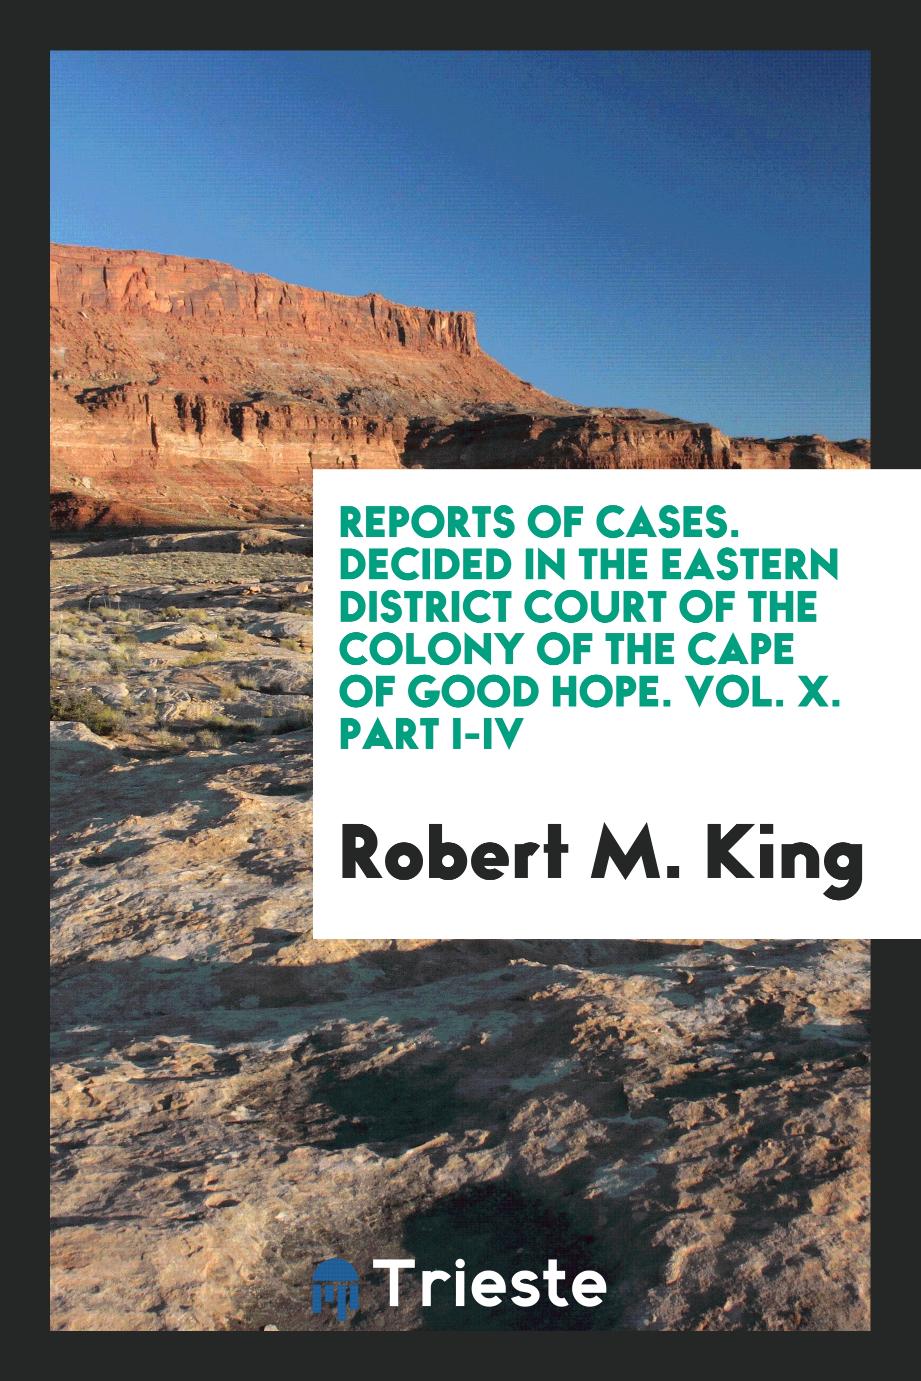 Reports of Cases. Decided in the Eastern District Court of the Colony of the Cape of Good Hope. Vol. X. Part I-IV